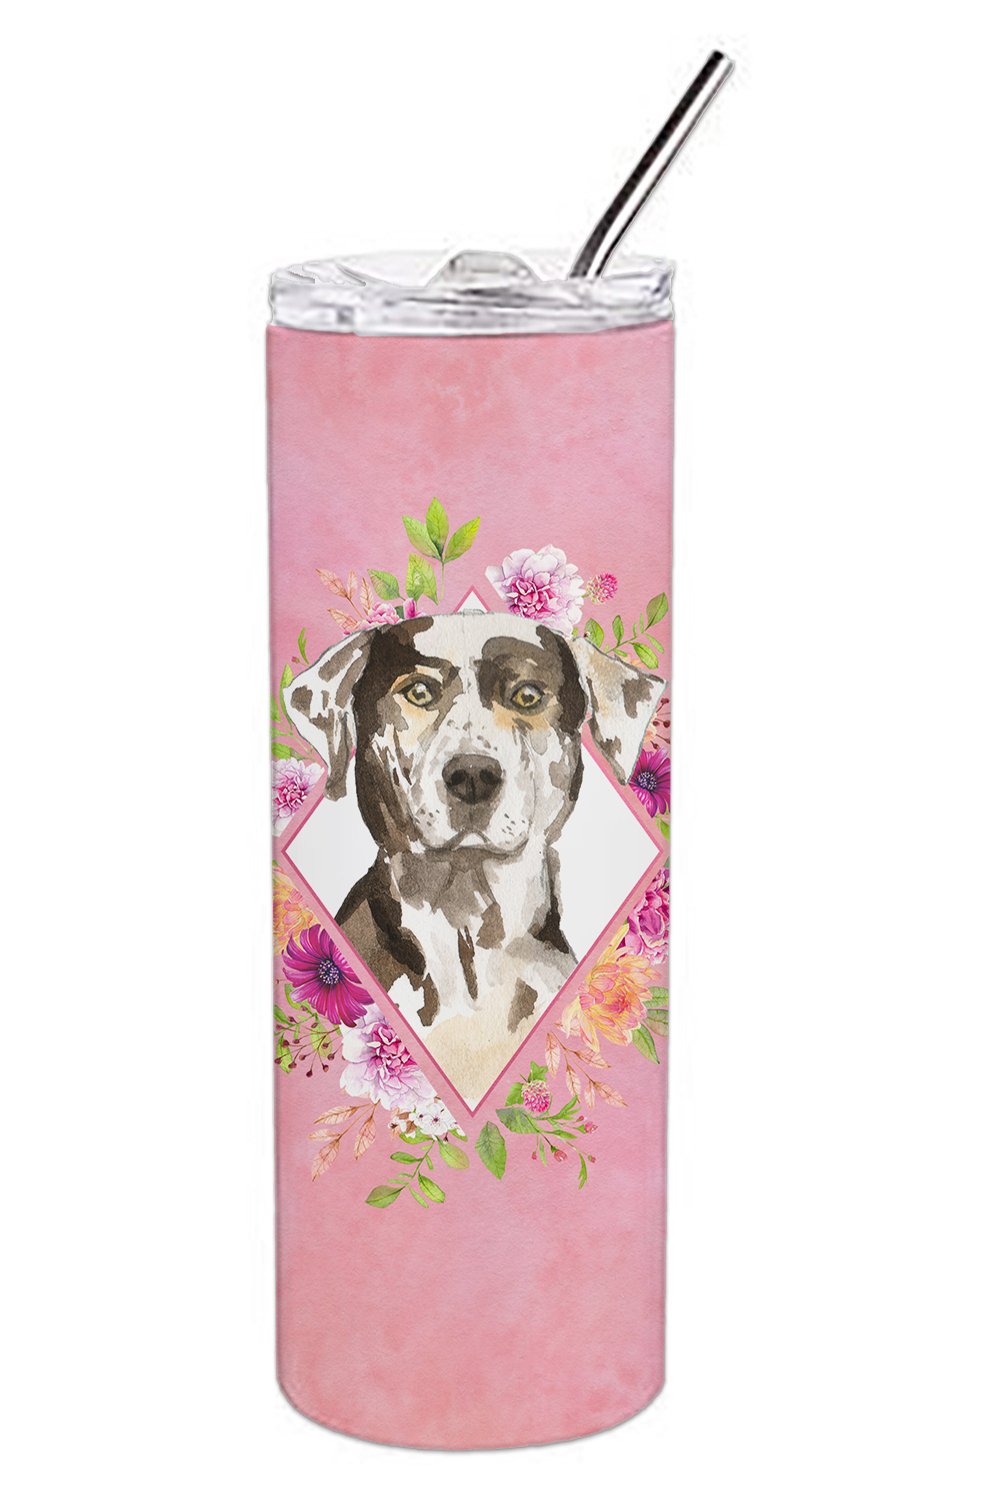 Catahoula Leopard Dog Pink Flowers Double Walled Stainless Steel 20 oz Skinny Tumbler CK4249TBL20 by Caroline&#39;s Treasures